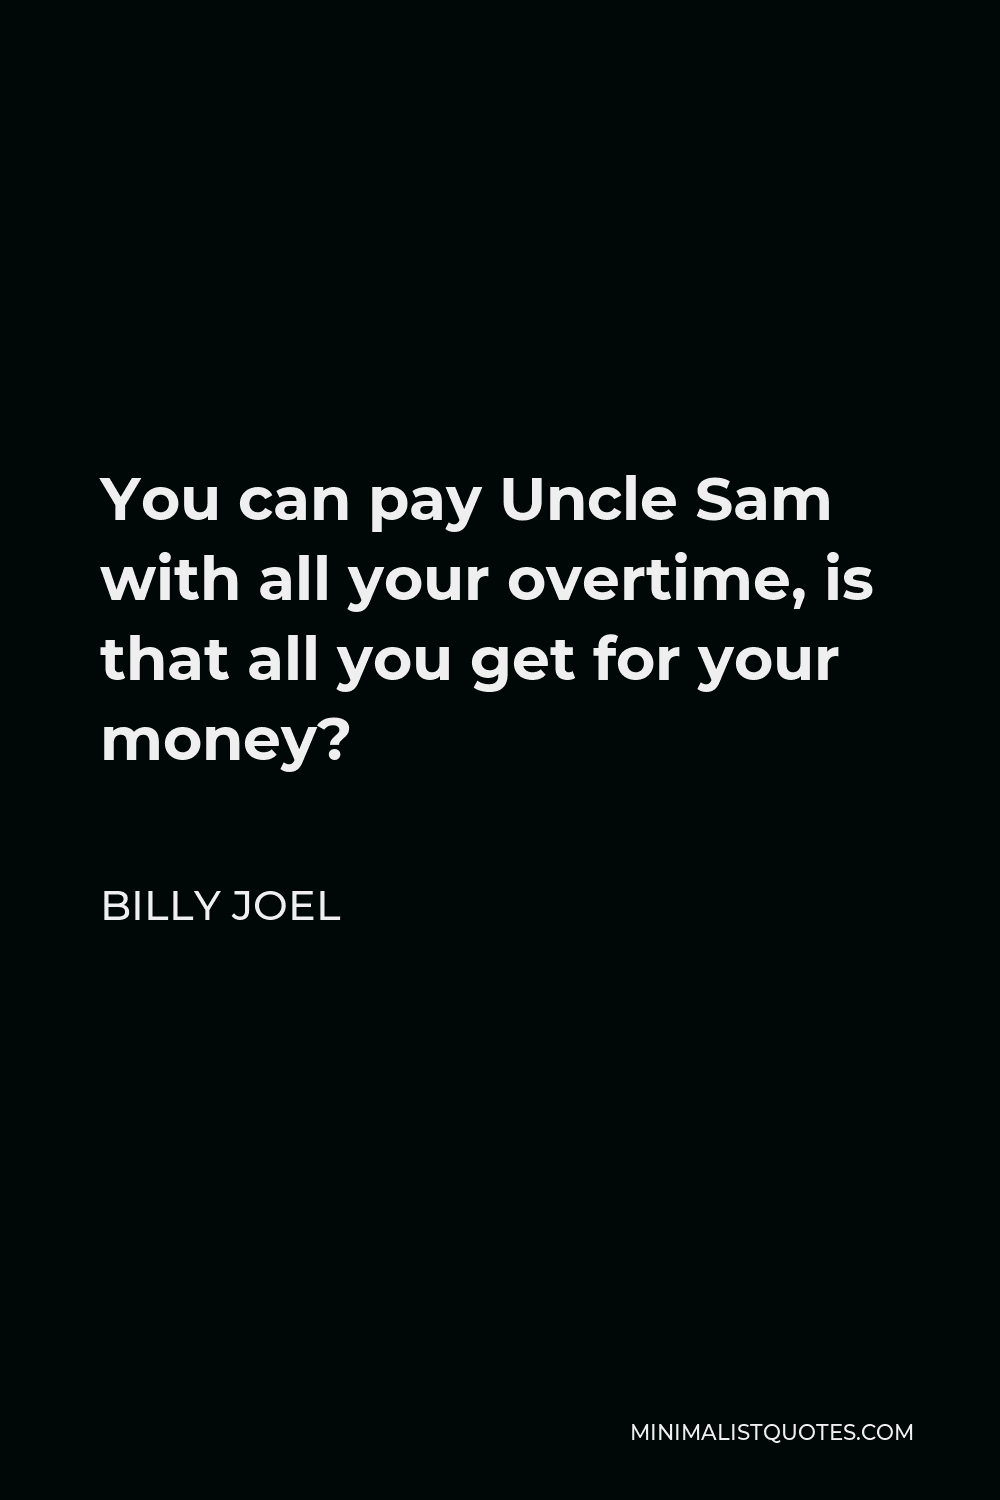 Billy Joel Quote - You can pay Uncle Sam with all your overtime, is that all you get for your money?